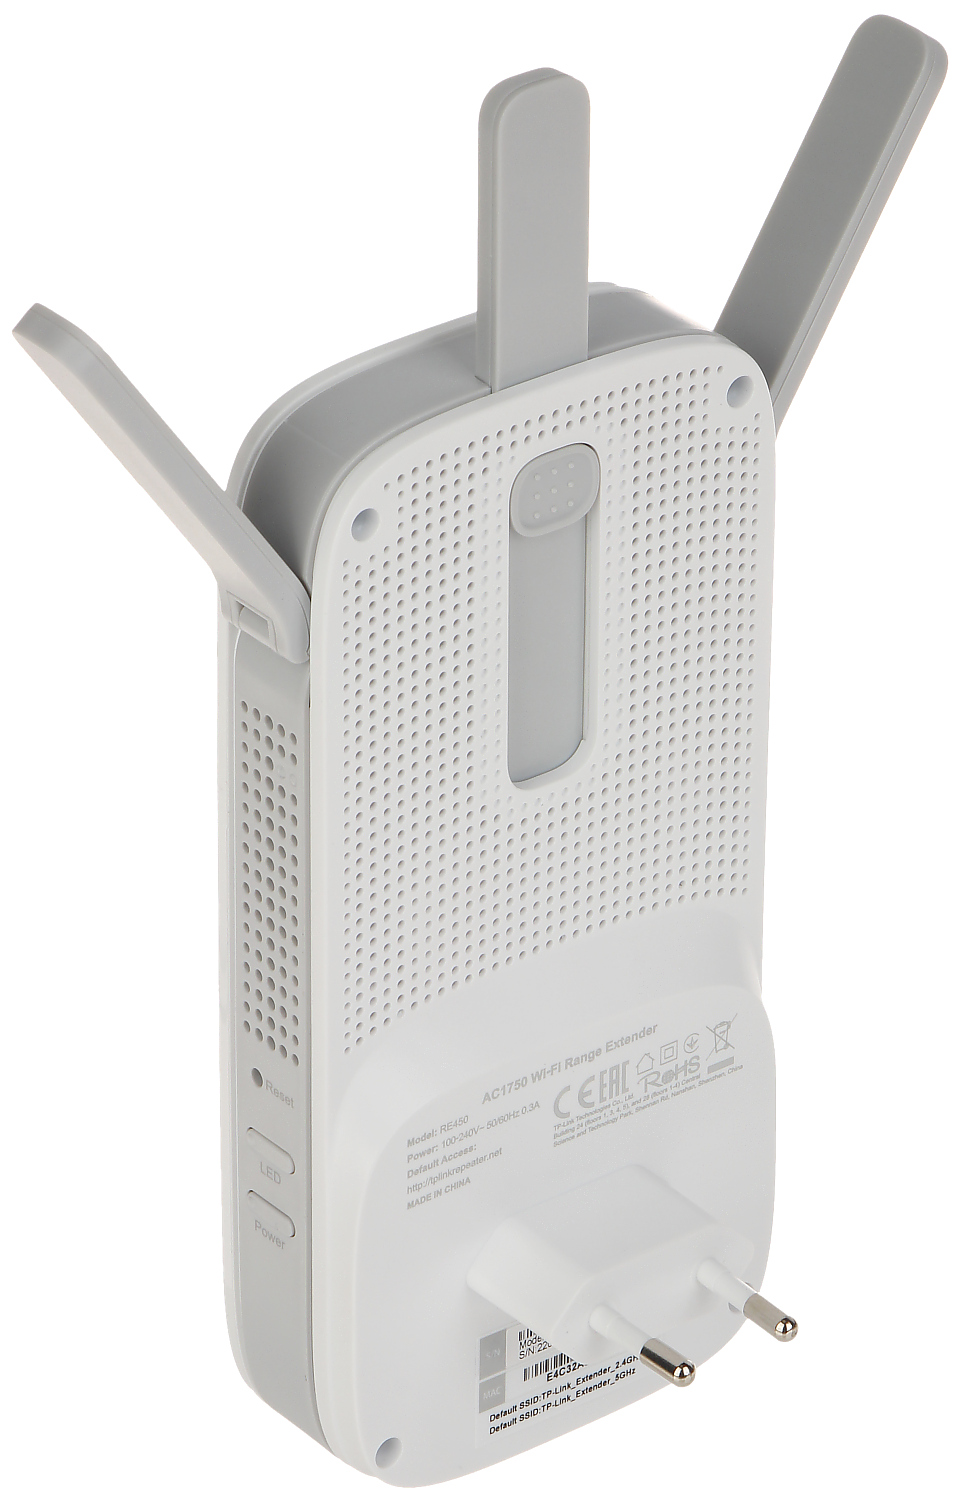 UNIVERSAL WI-FI RANGE EXTENDER TL-RE450 2.4 GHz, 5 GHz... - Other Devices -  Delta